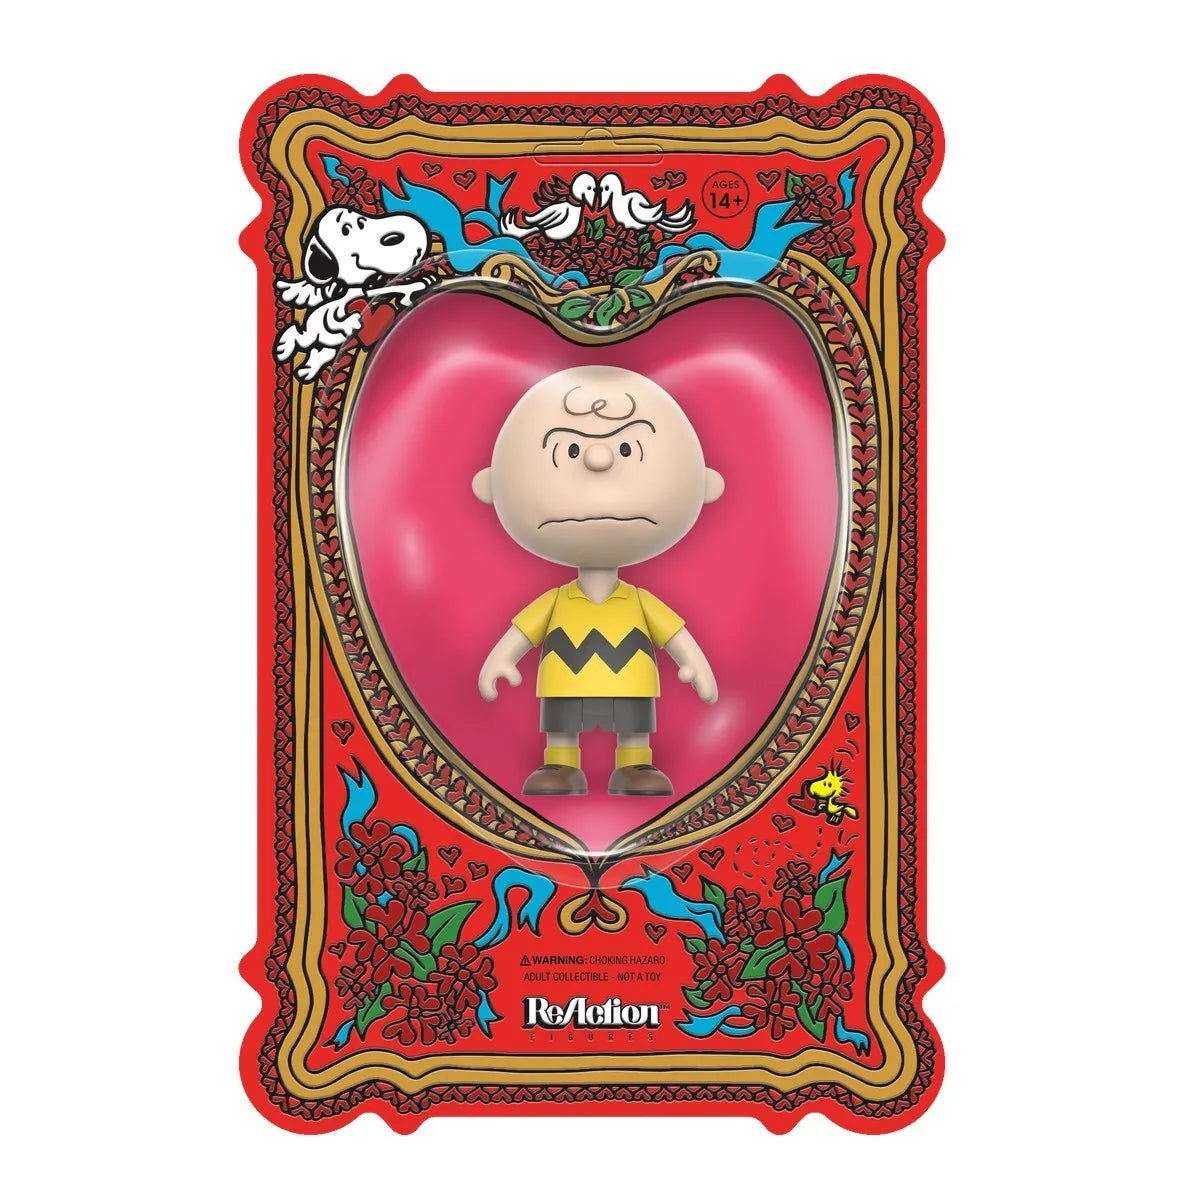 Peanuts ReAction "I Hate Valentine's Day" Charlie Brown Figure - Peanuts by Super7